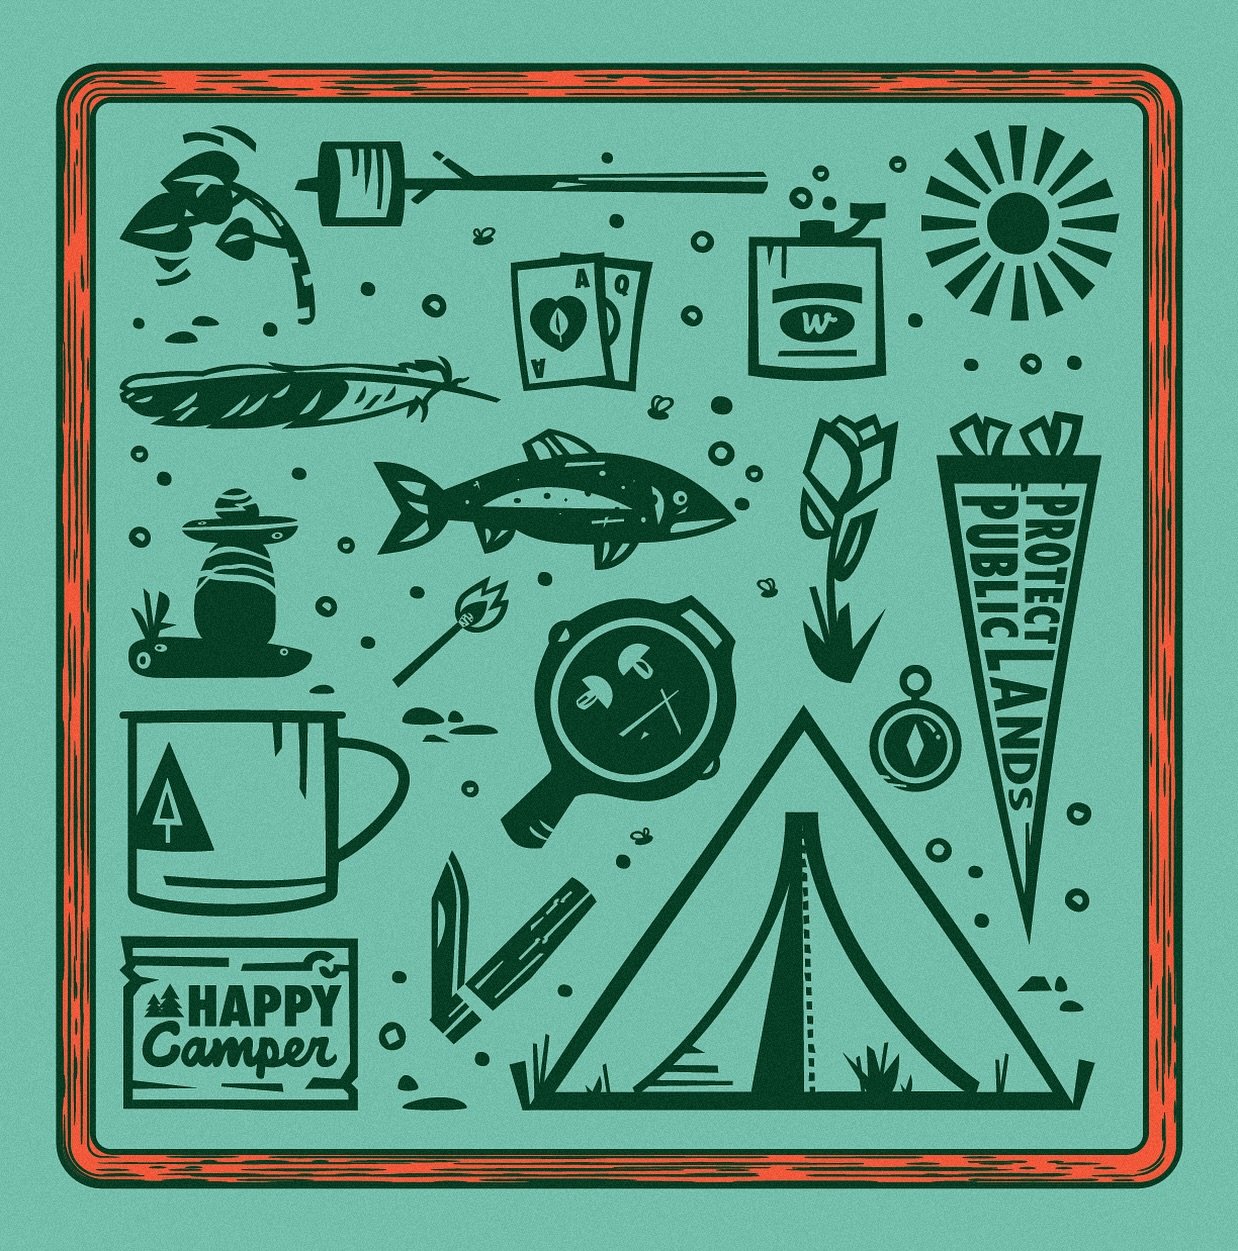 Camping season is here! Can&rsquo;t wait to get out and put to use some of these icons.